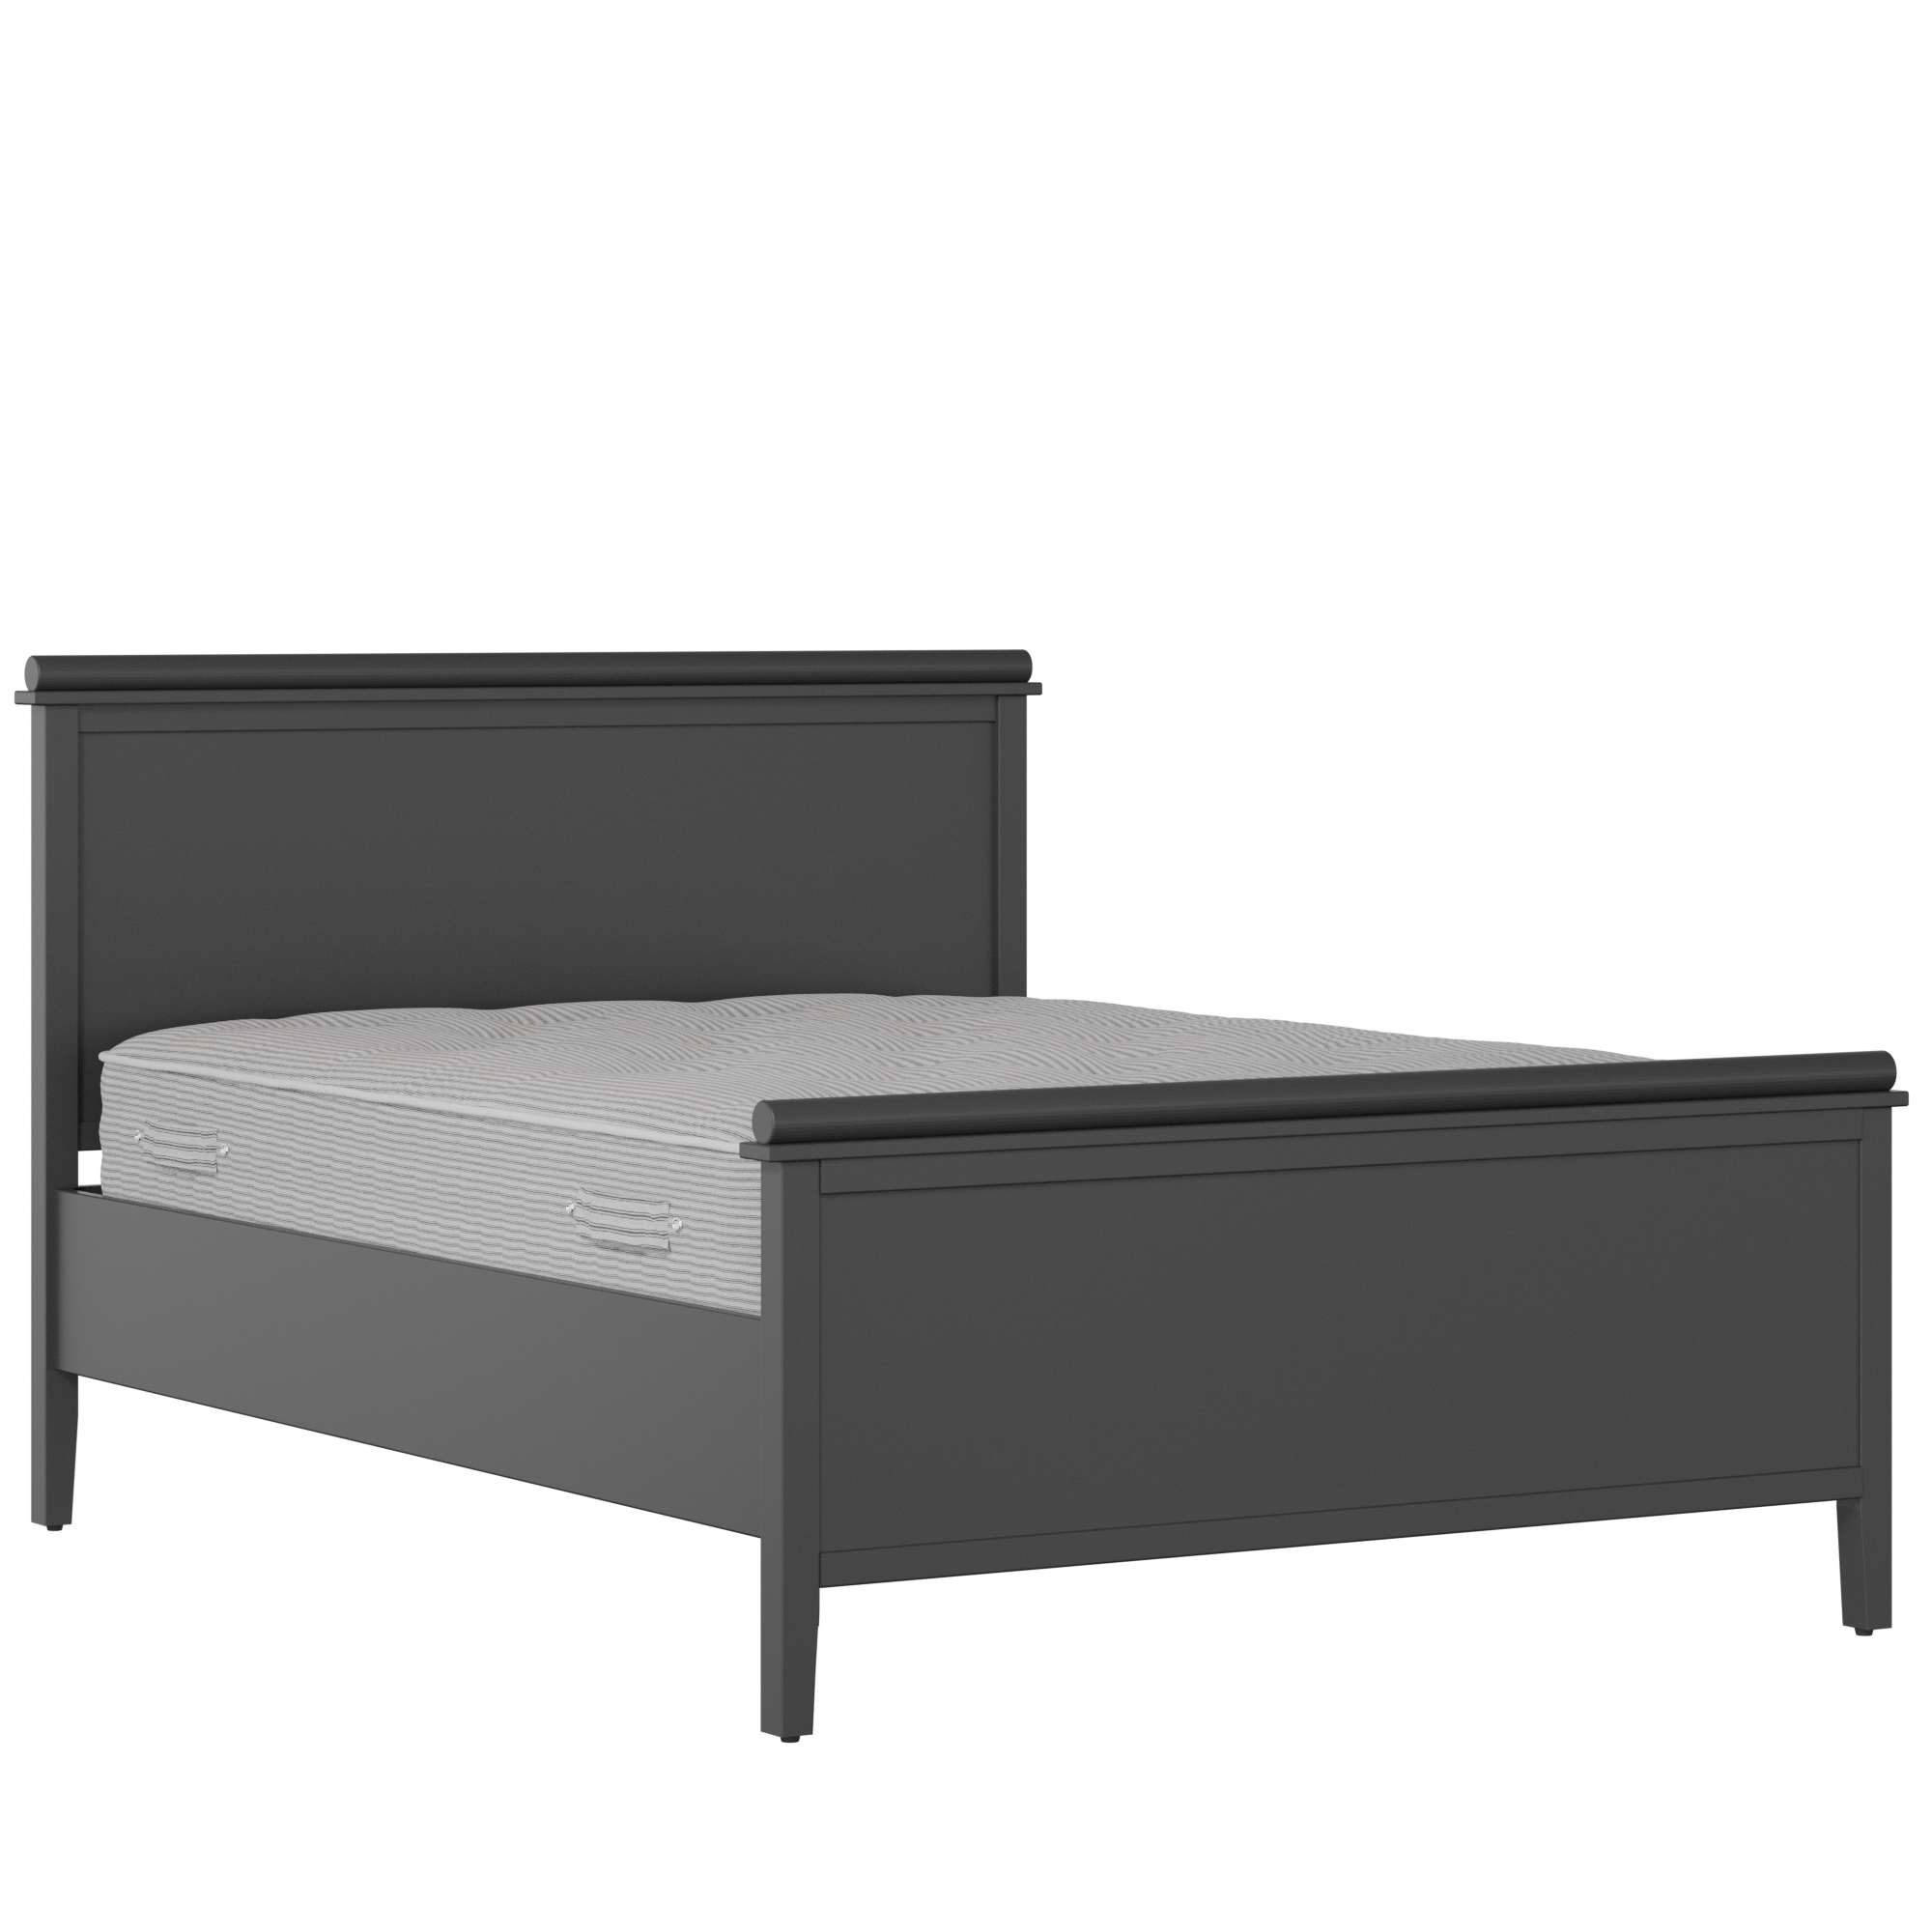 Nocturne Painted painted wood bed in black with Juno mattress